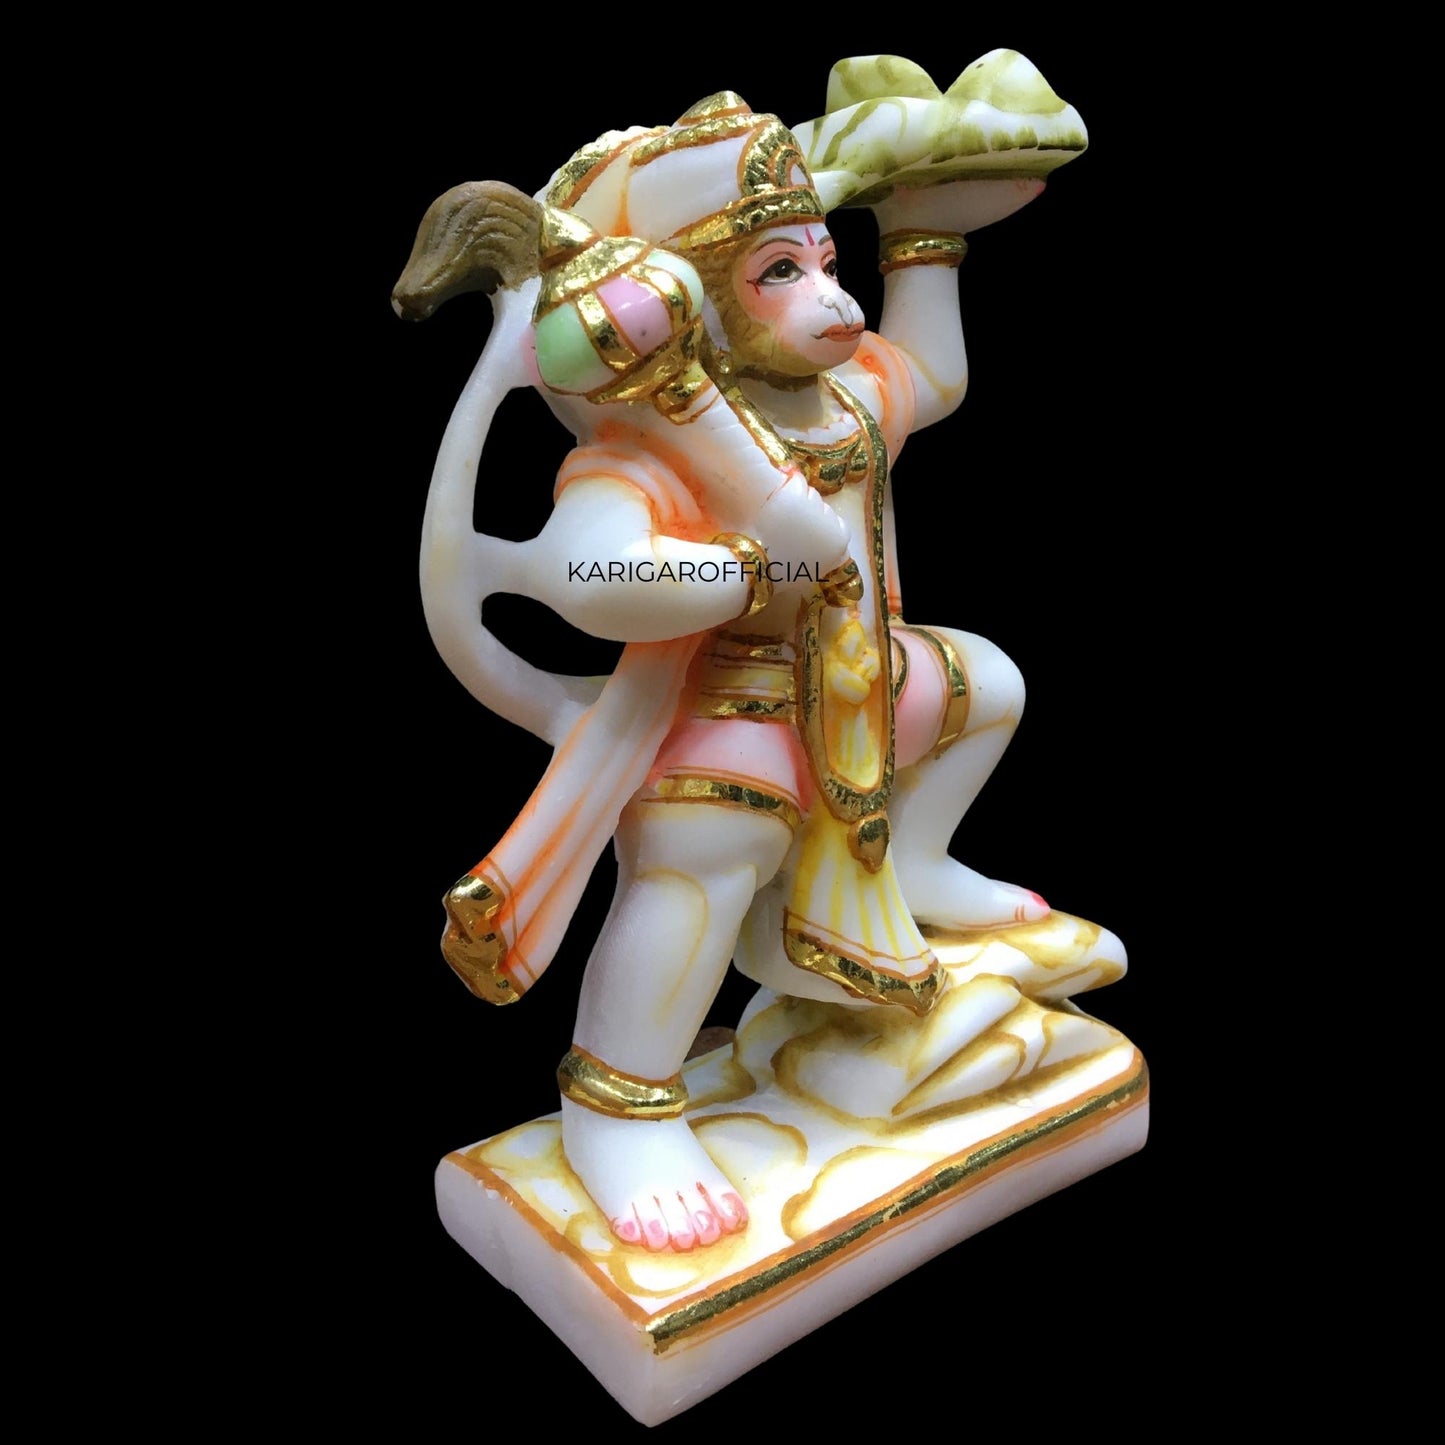 New Hanuman Statue, Multicolor 6 inches Hand Painted Marble Blessing Bajrang Bali Figurine, Natural Powerlifter Hindu Monkey god of Devotion, Strength, Bhakti, Perfect for Small Home Temple Decoration